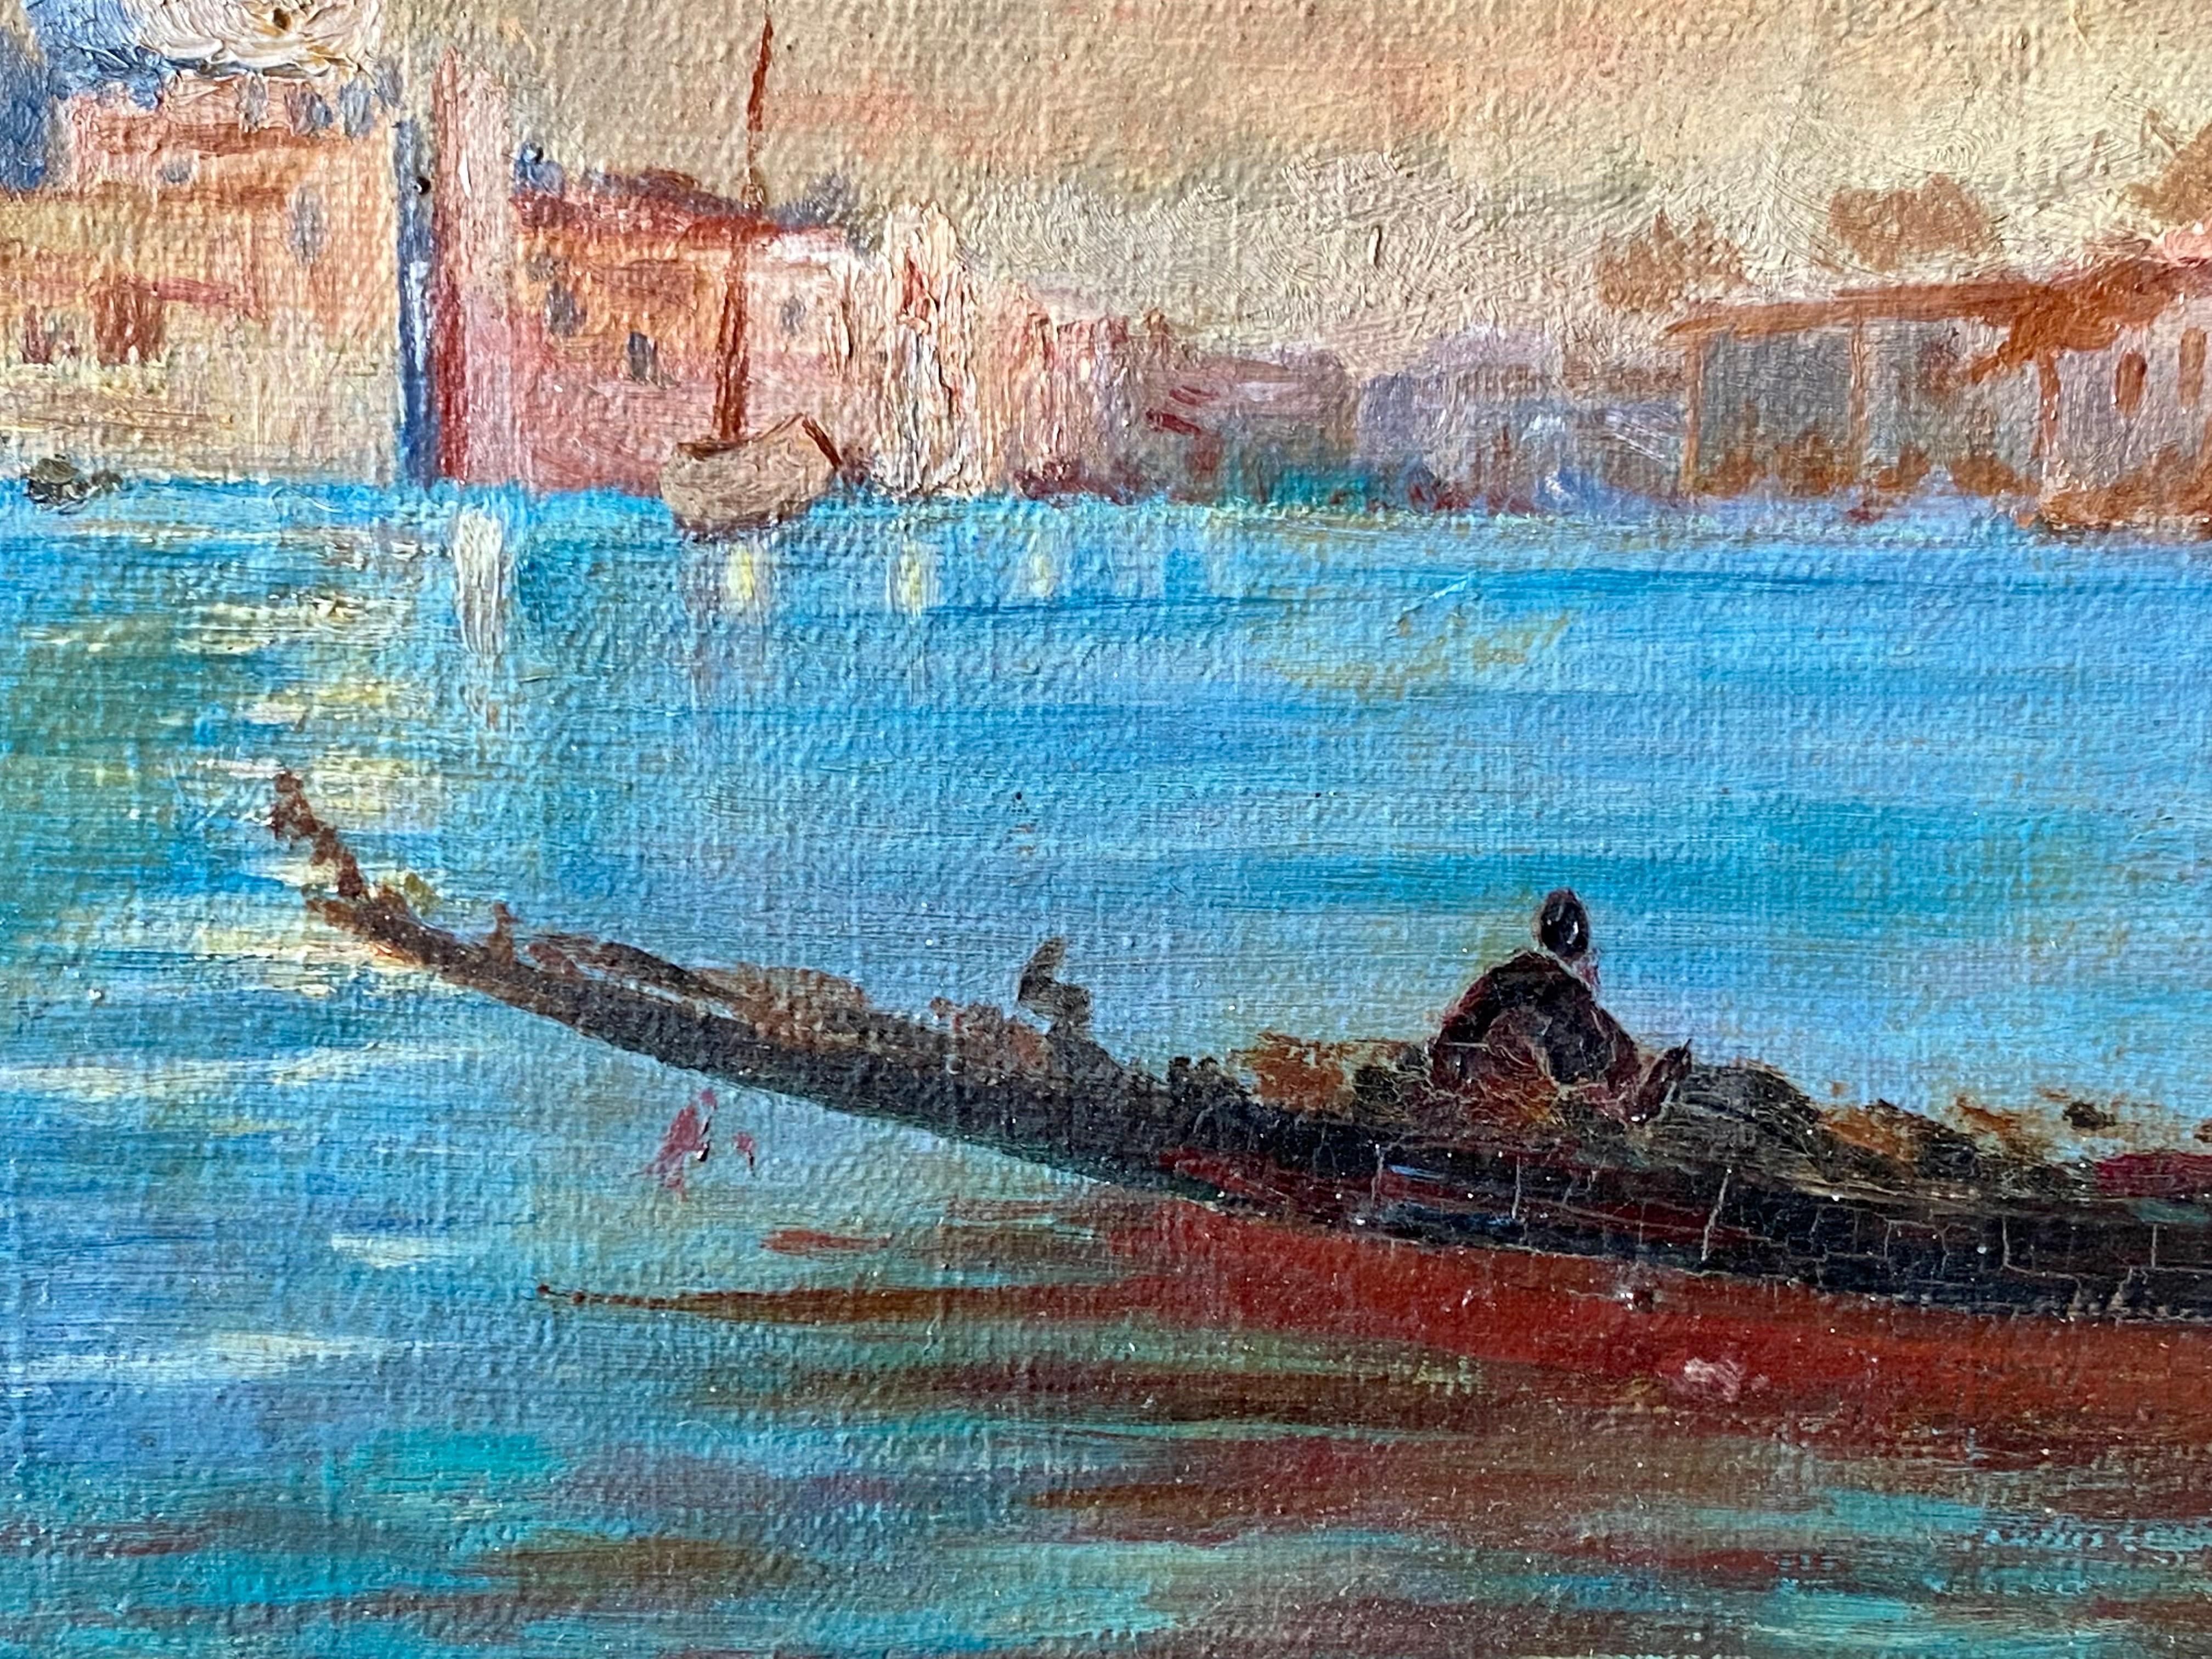 19th century French impressionist painting - Cityscape of Venice by sunset 1